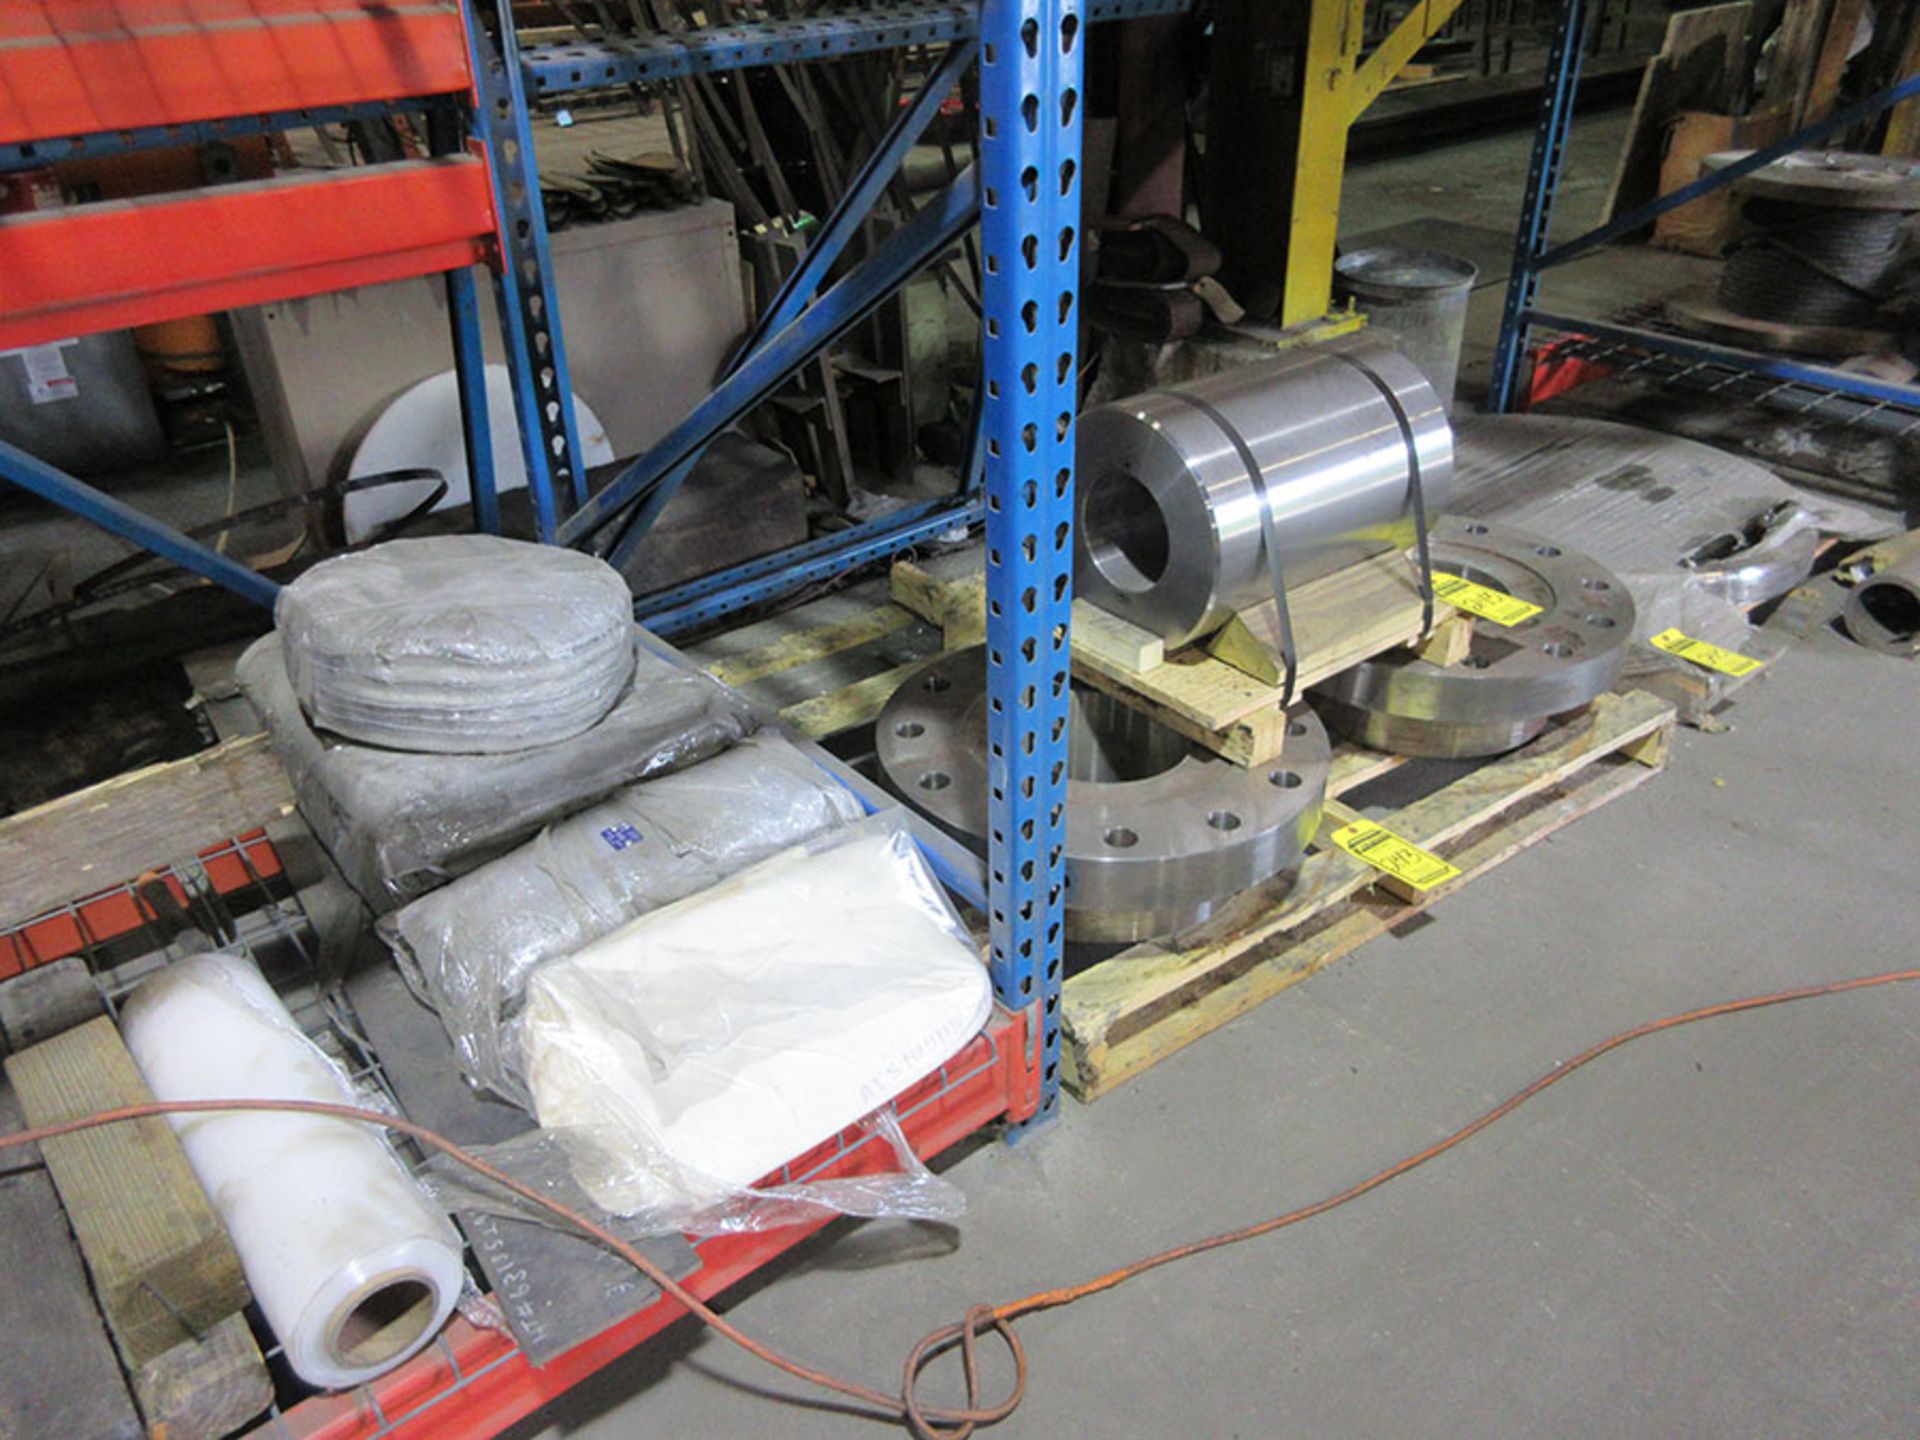 CONTENTS OF PALLET RACK; STAINLESS STEEL PRODUCT, NUTS, AND BOLTS